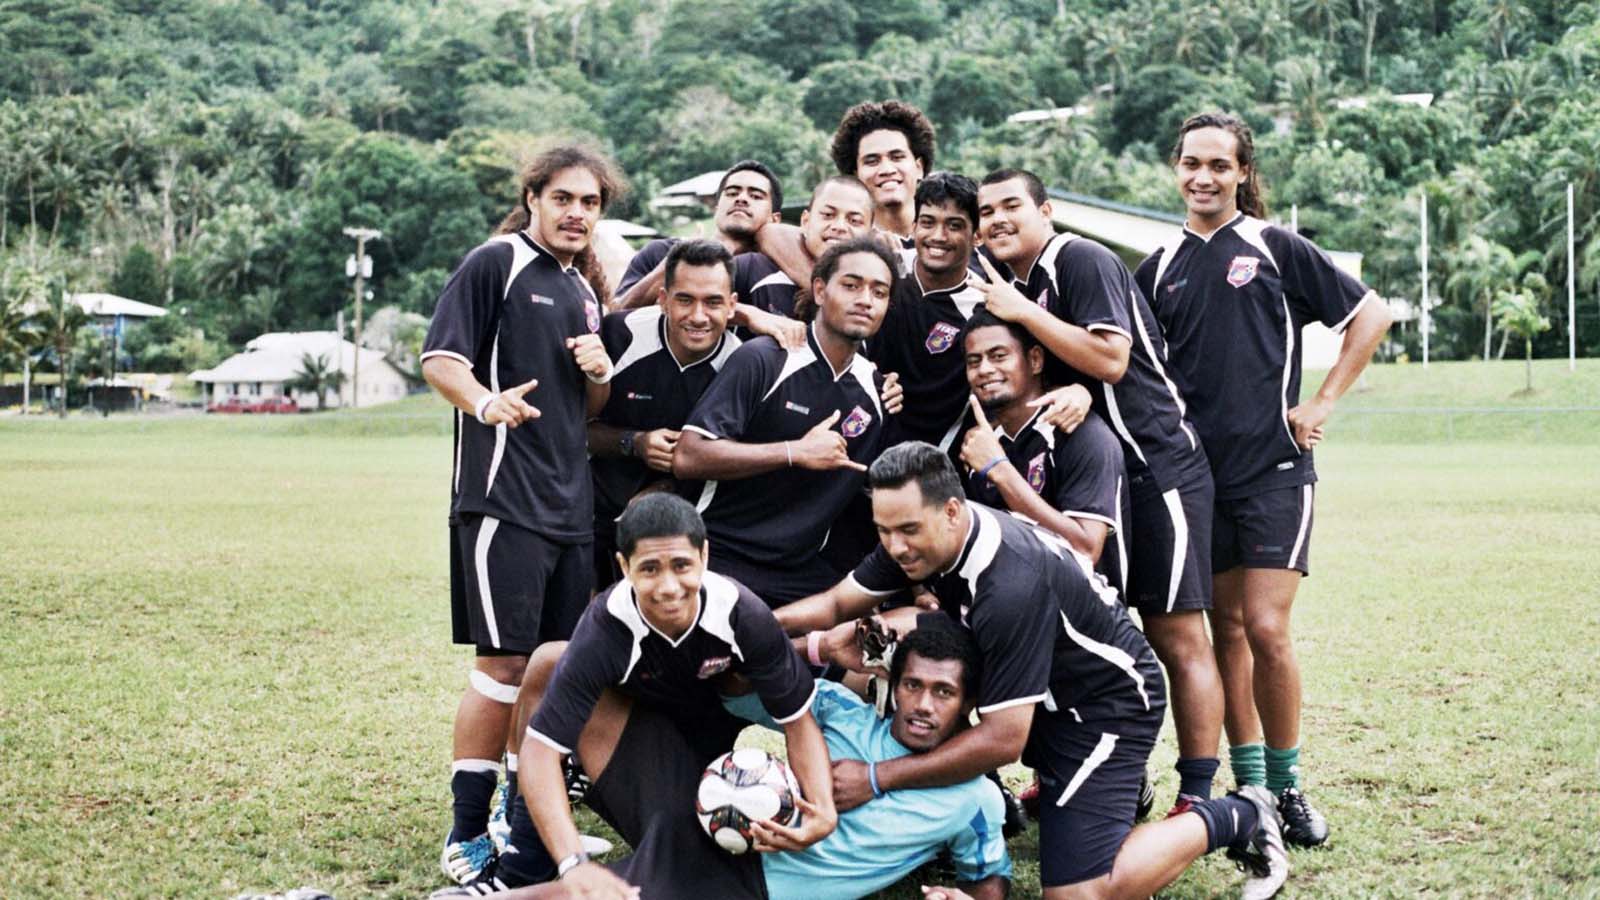 The real American Samoa soccer team depicted in Next Goal Wins. Image © Icon Film Distribution